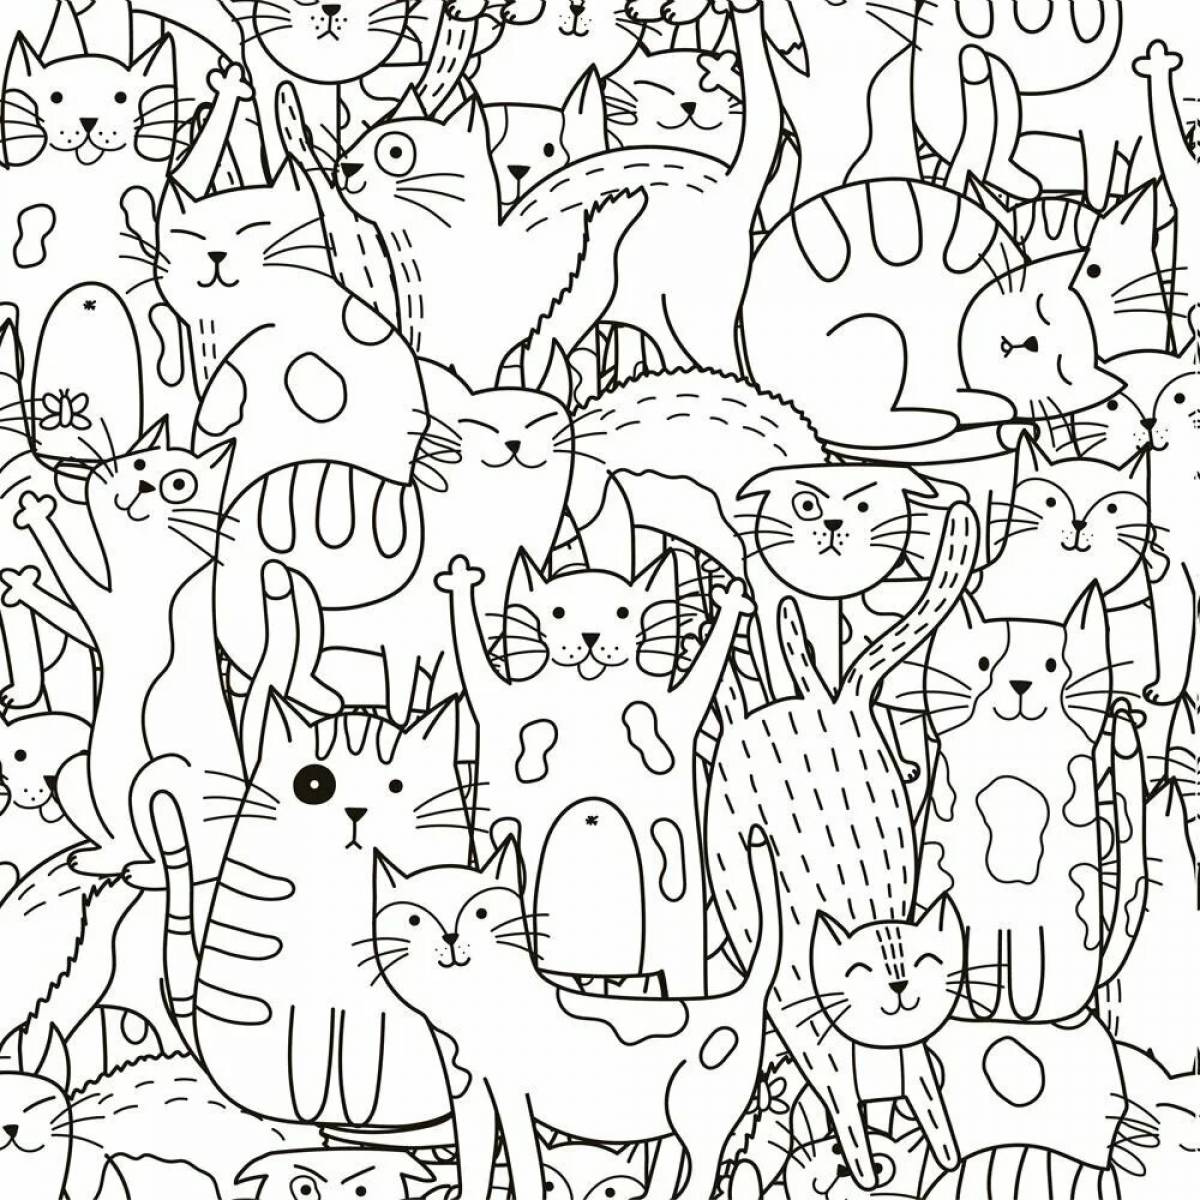 Witty cats coloring page